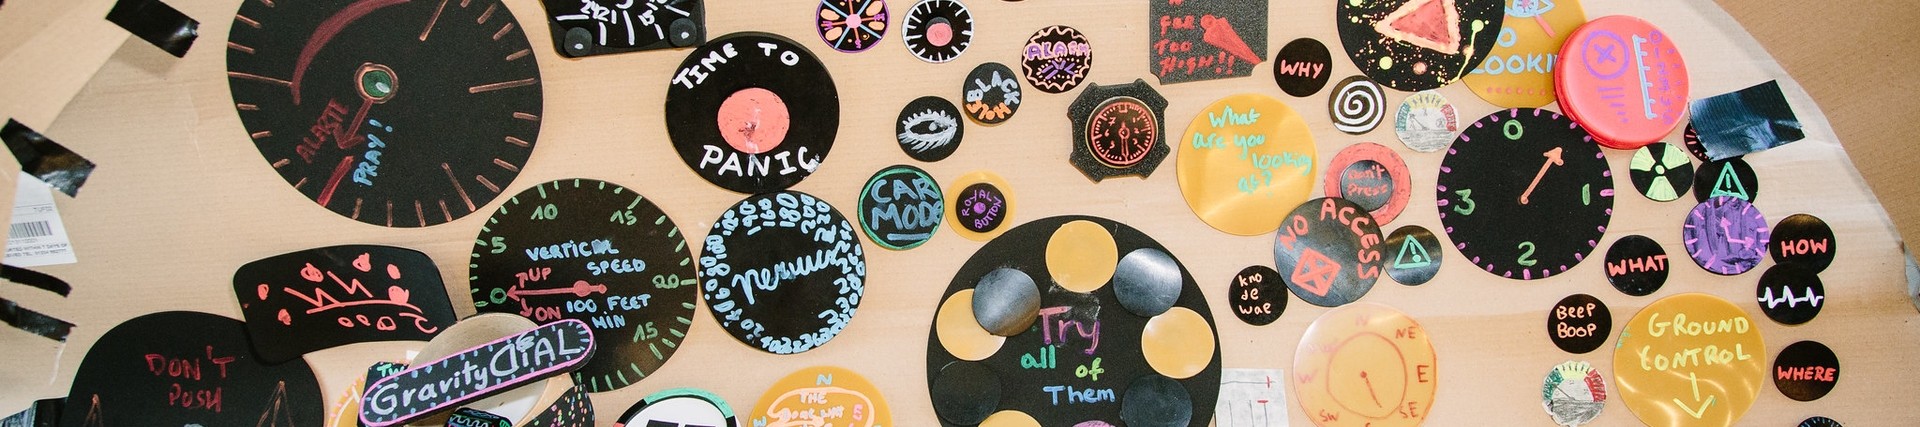 Young people's art work made out of old records 